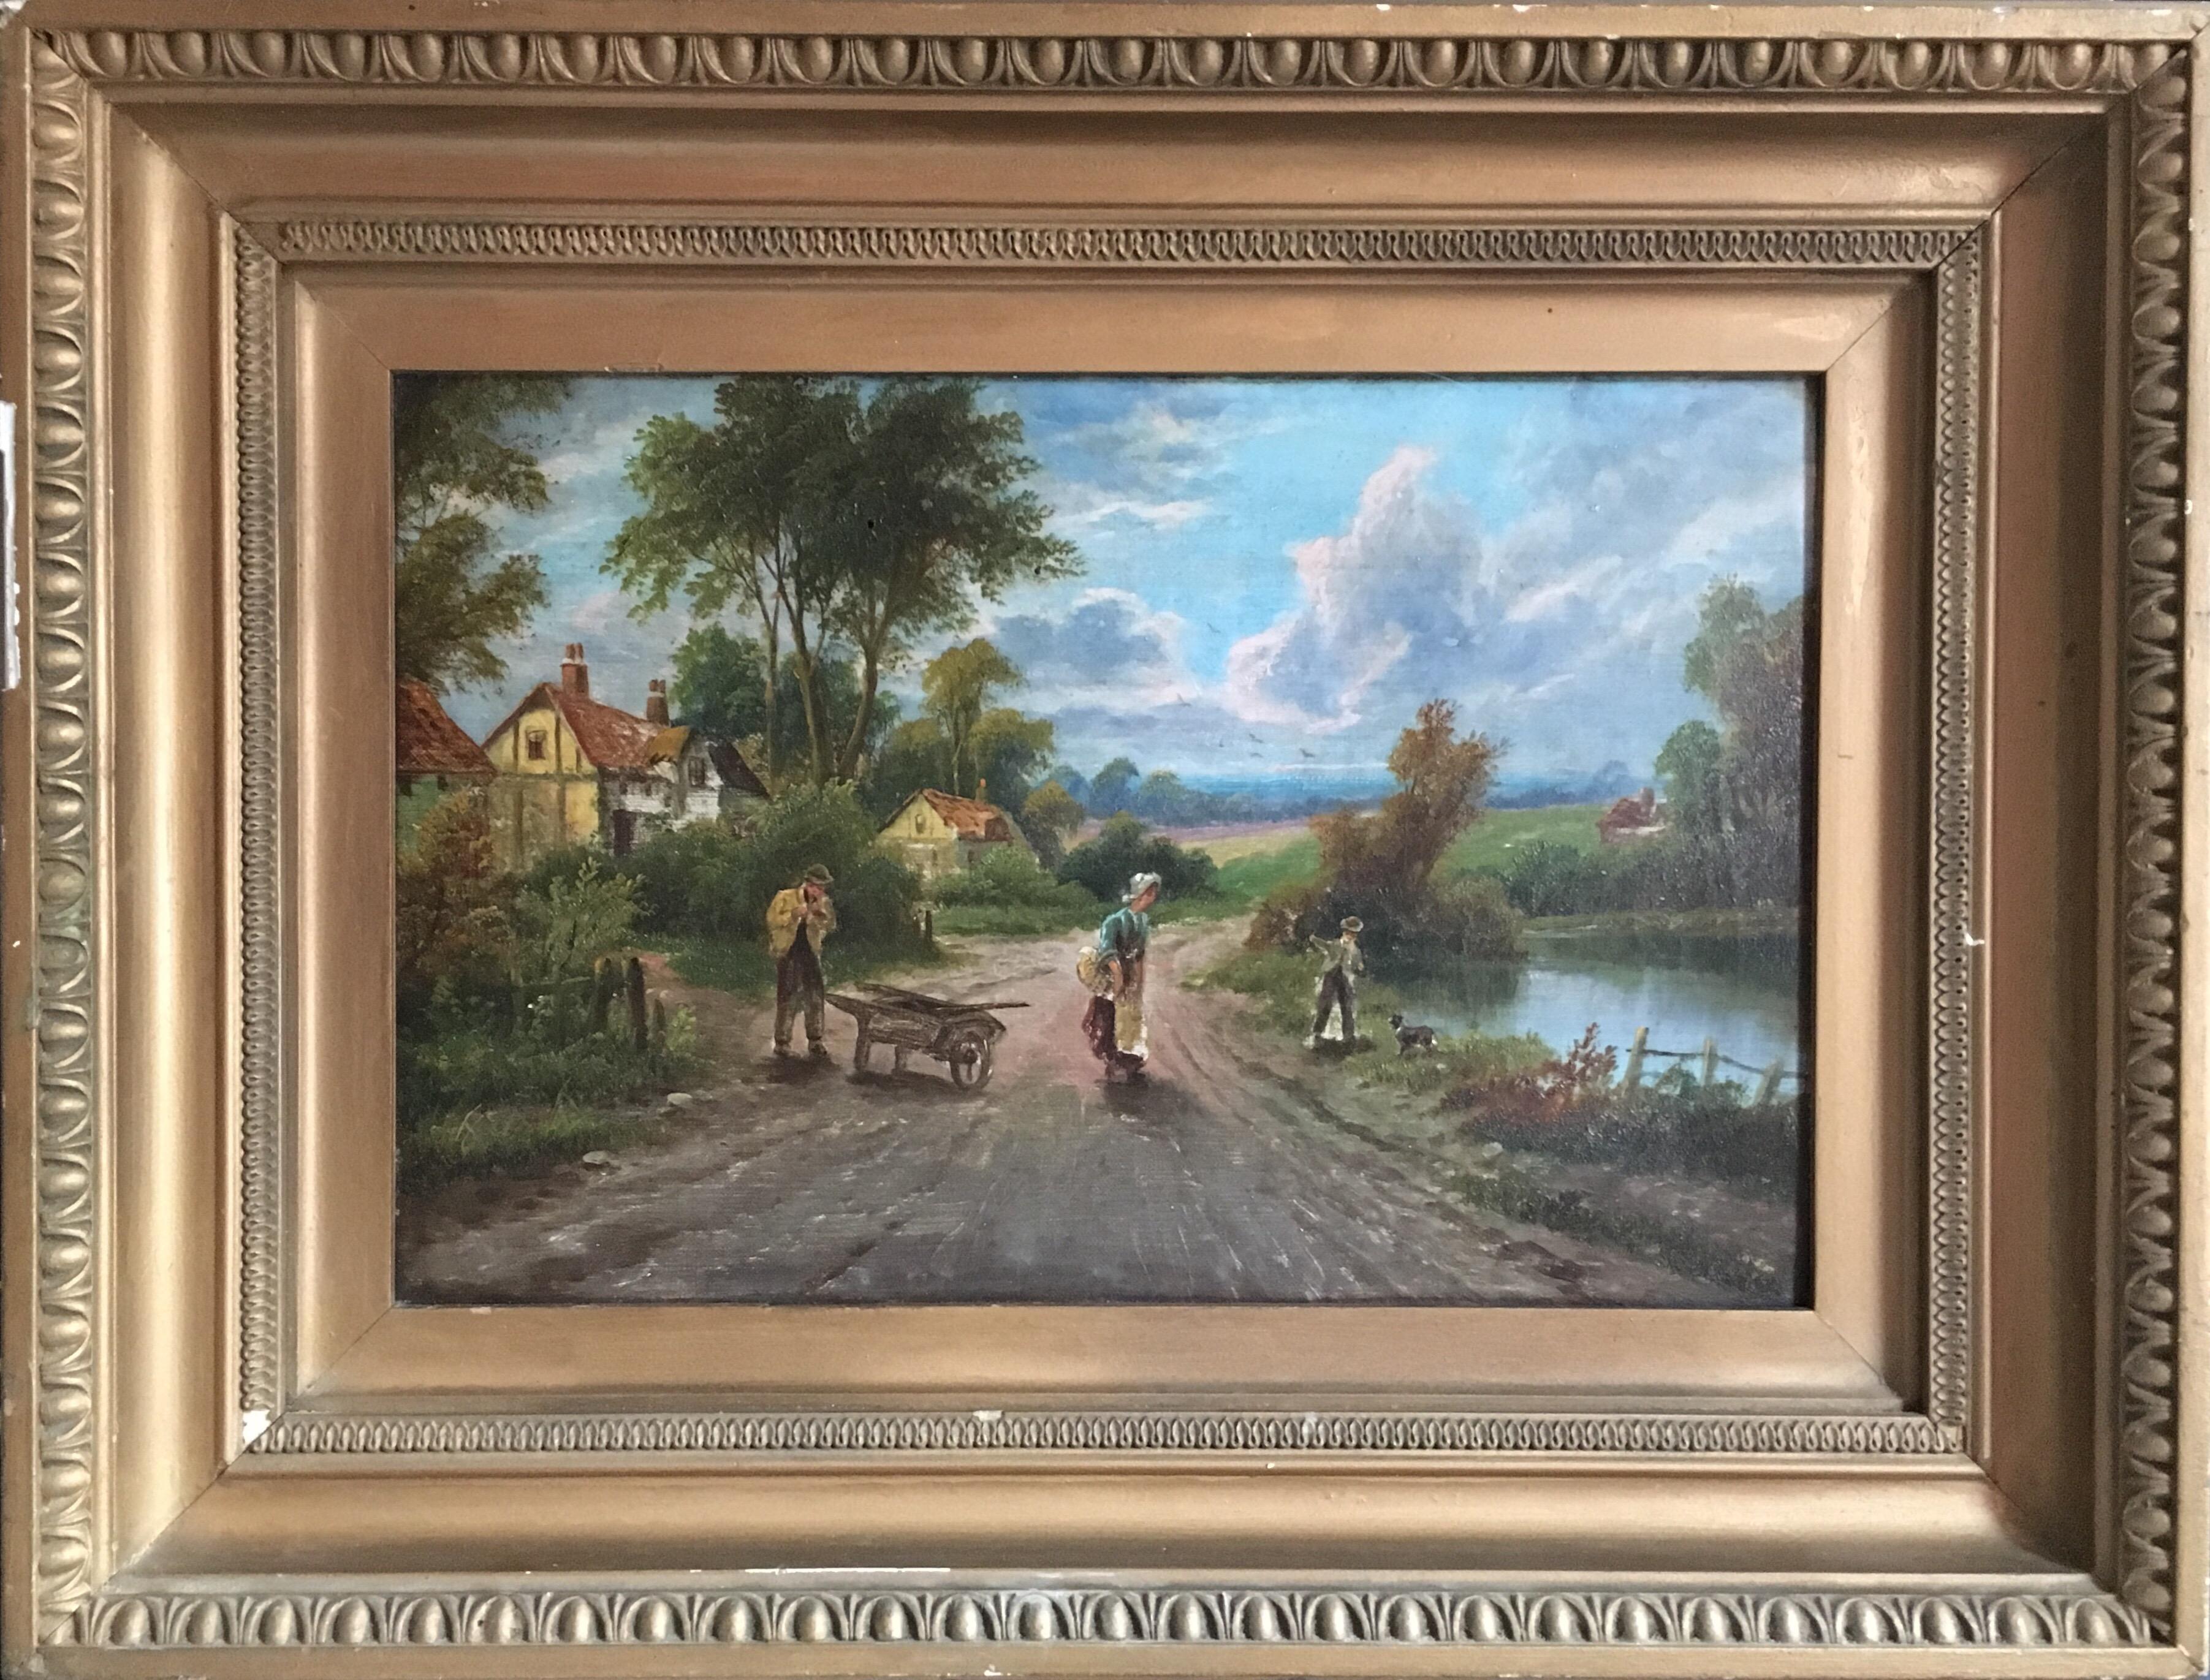 Unknown Figurative Painting - The Rural Road, Countryside Landscape Antique Oil Painting